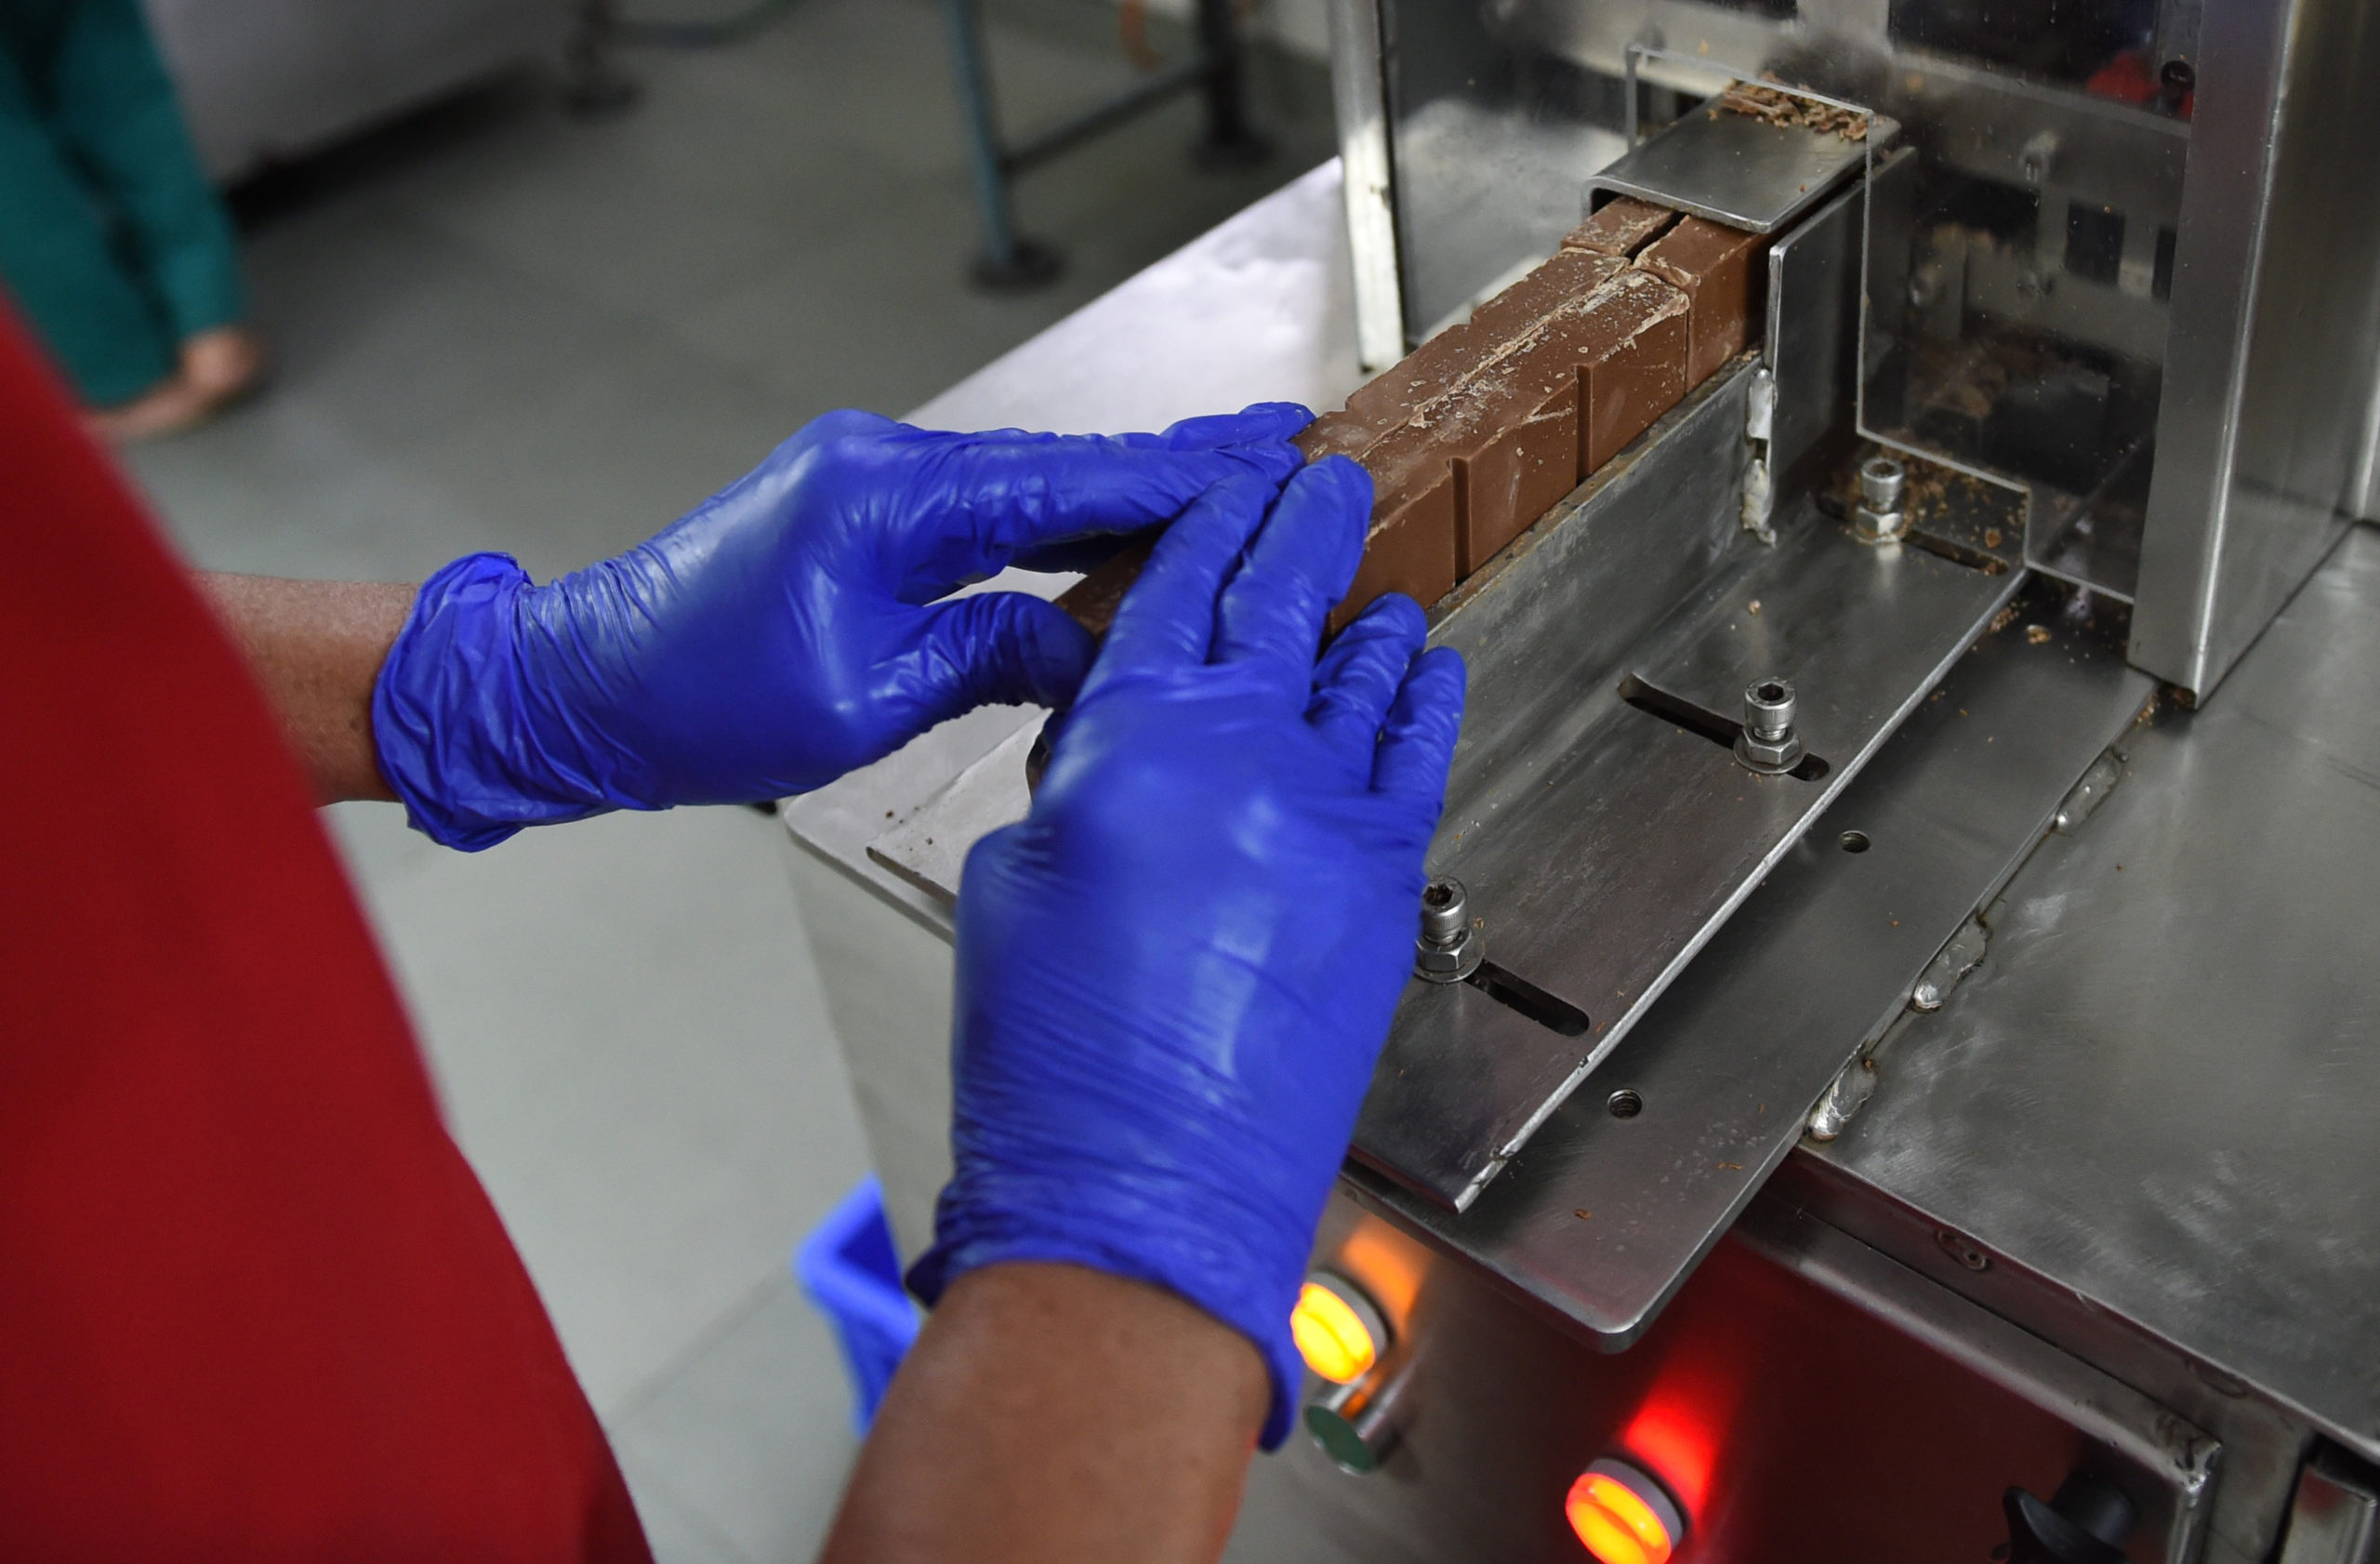 An Indian factory worker cuts chocolate bars with a chocolate bar cutting machine on an assembly line at the Havmor Ice Cream plant in Naroda, near Ahmedabad, on April 5, 2018. South Korea's Lotte Confectionery Group in 2017 took over India's Havmor Ice Cream, which produces some 200,000 litres of ice cream daily from its Naroda plant. (Photo credit SAM PANTHAKY/AFP via Getty Images)